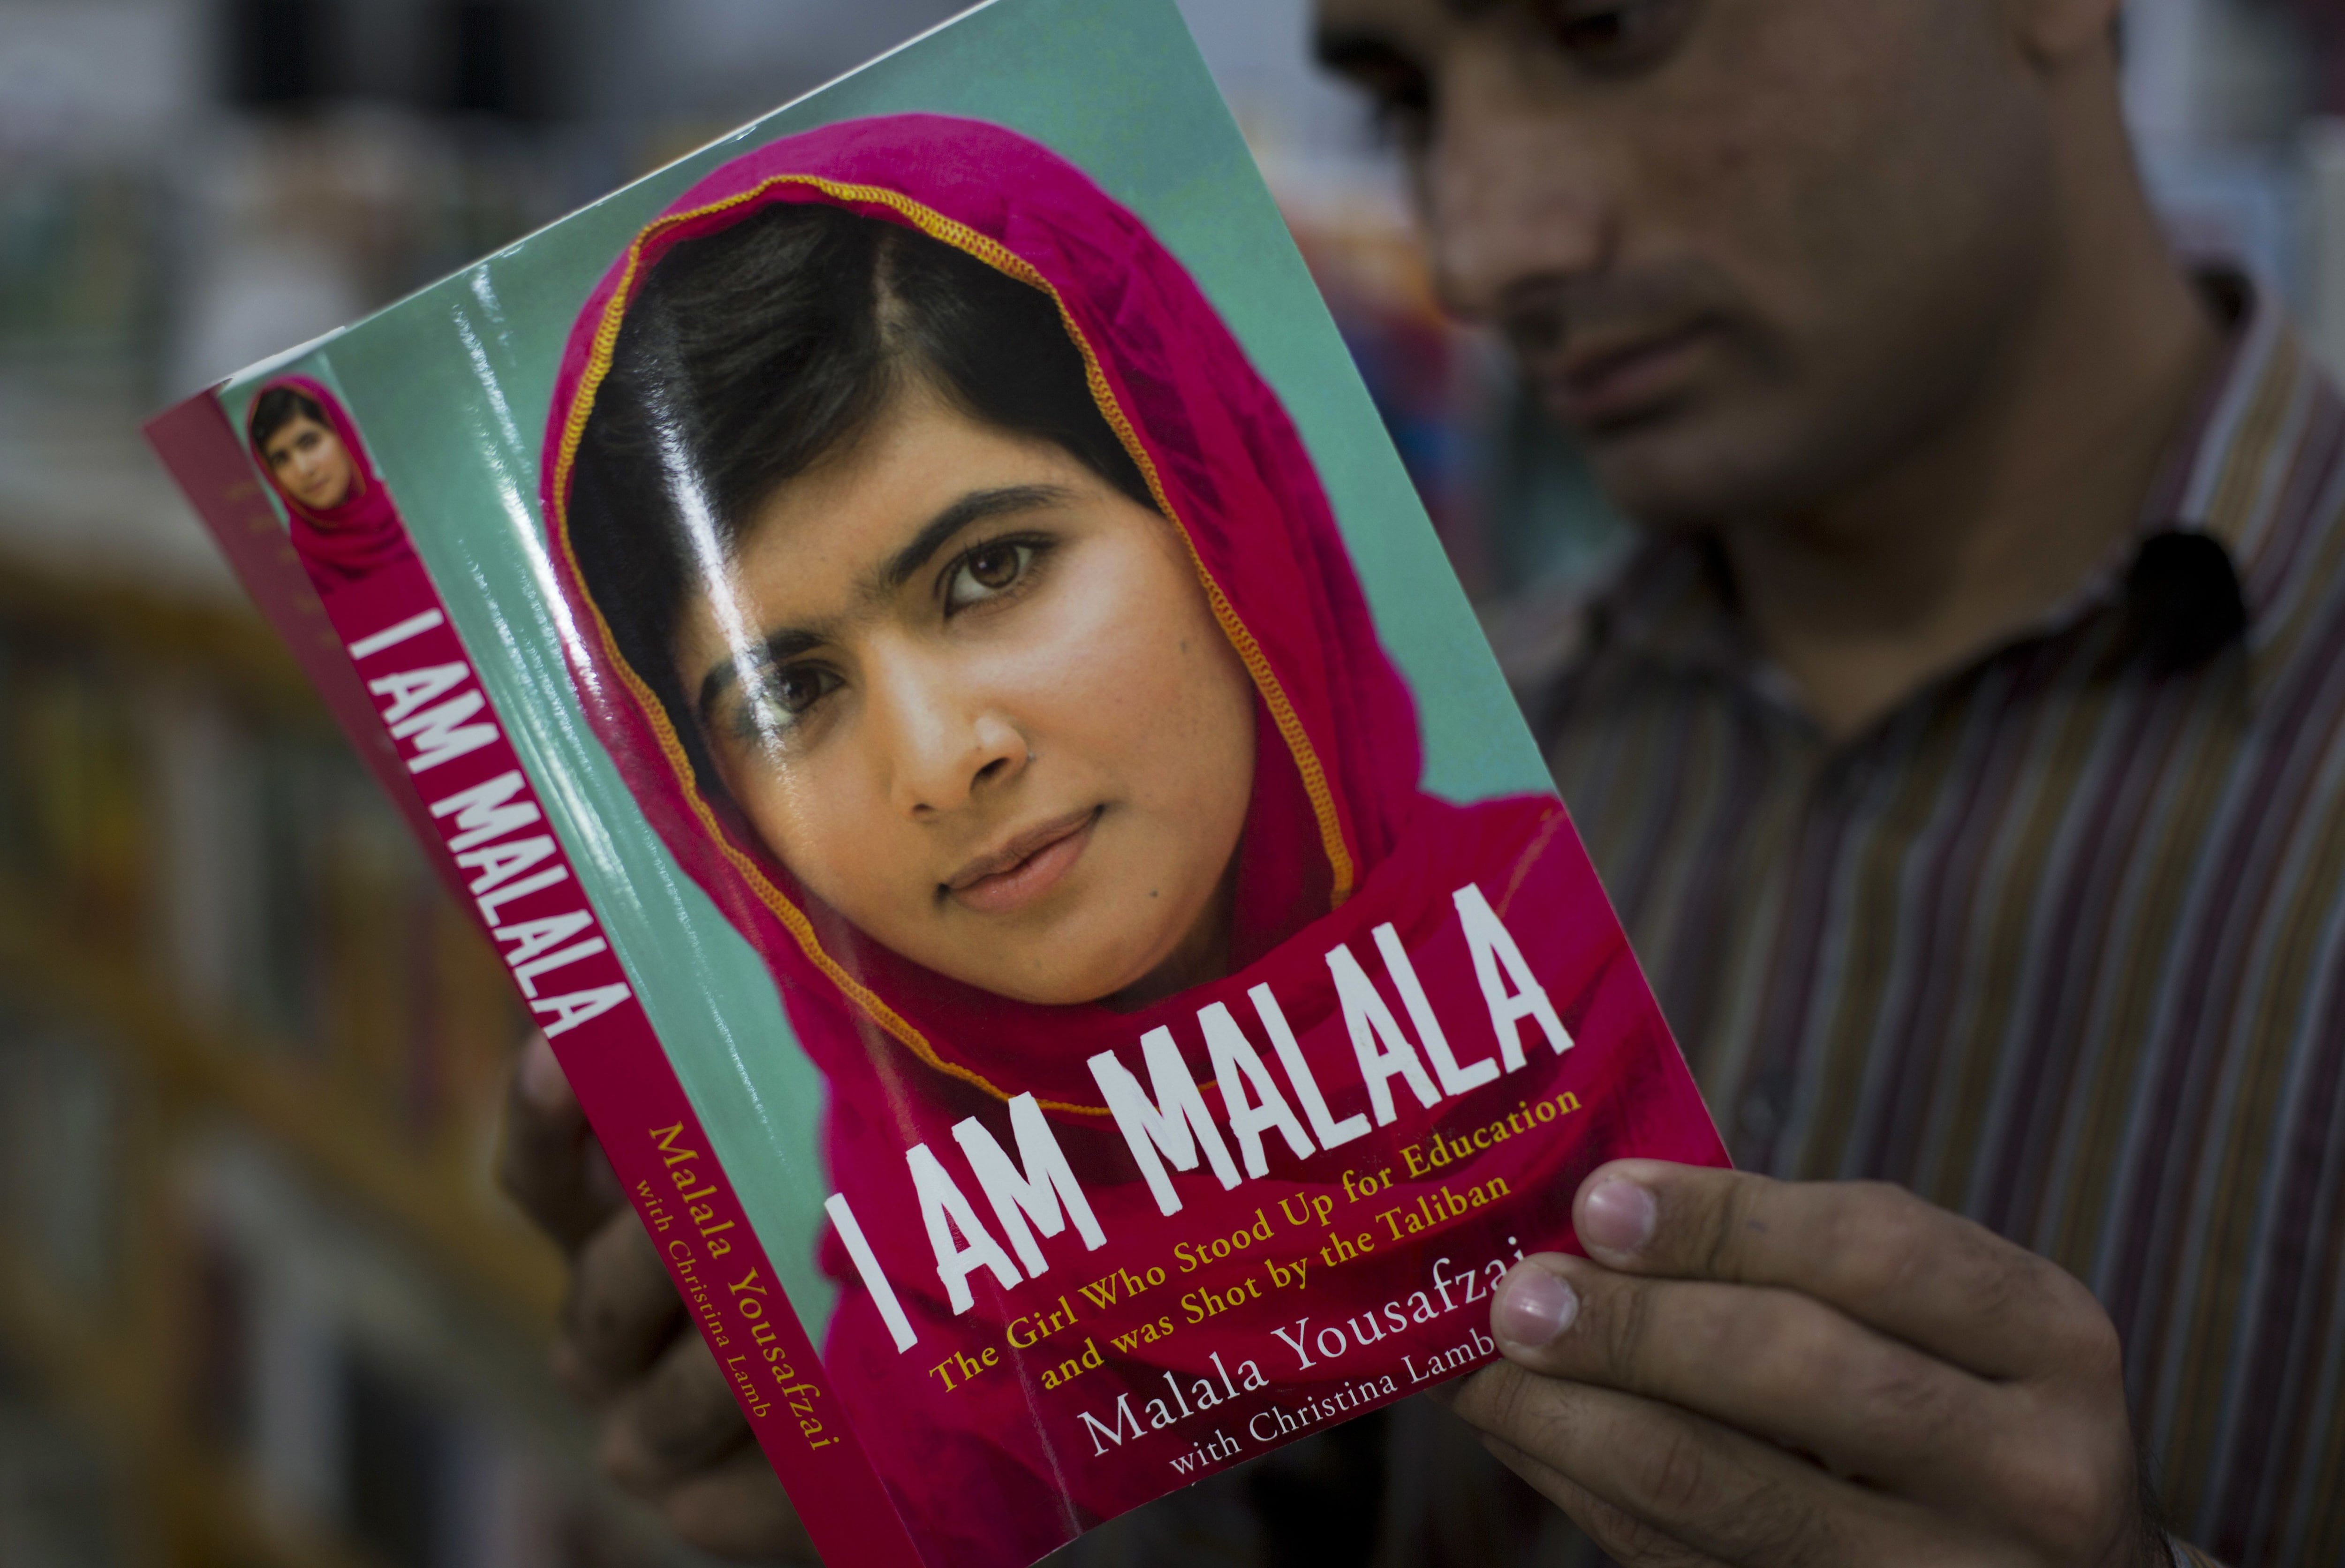 FILE - In this Friday, Oct. 10, 2014 file photo, a Pakistani customer reads the book written by Malala Yousafzai, who survived a Taliban attack, in Islamabad, Pakistan. Nobel Peace Prize winner Malala returned to Pakistan early Thursday, March 29, 2018 for the first time since she was shot in 2012 by Taliban militants angered at her championing of education for girls. (AP Photo/B.K. Bangash, file)